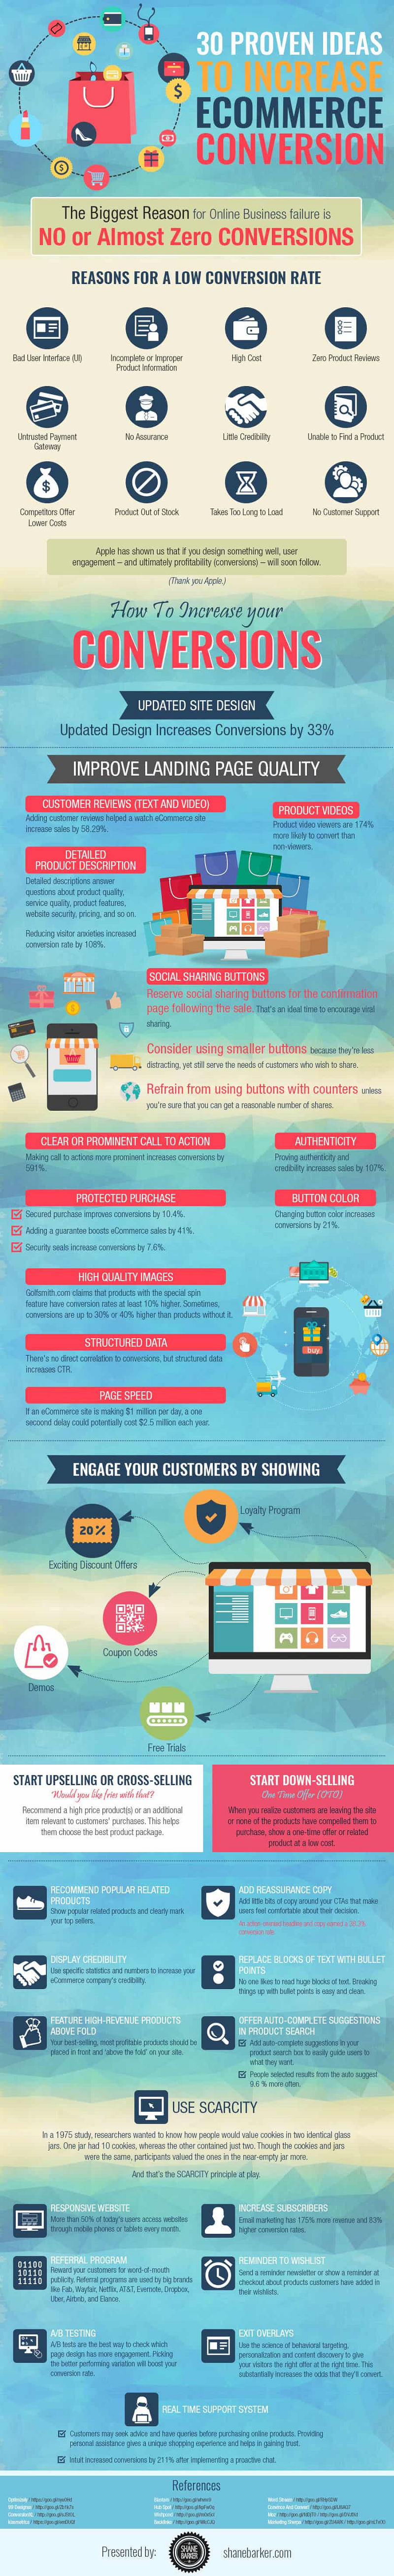 30 proven ideas to increase online sales on your ecommerce website infographic